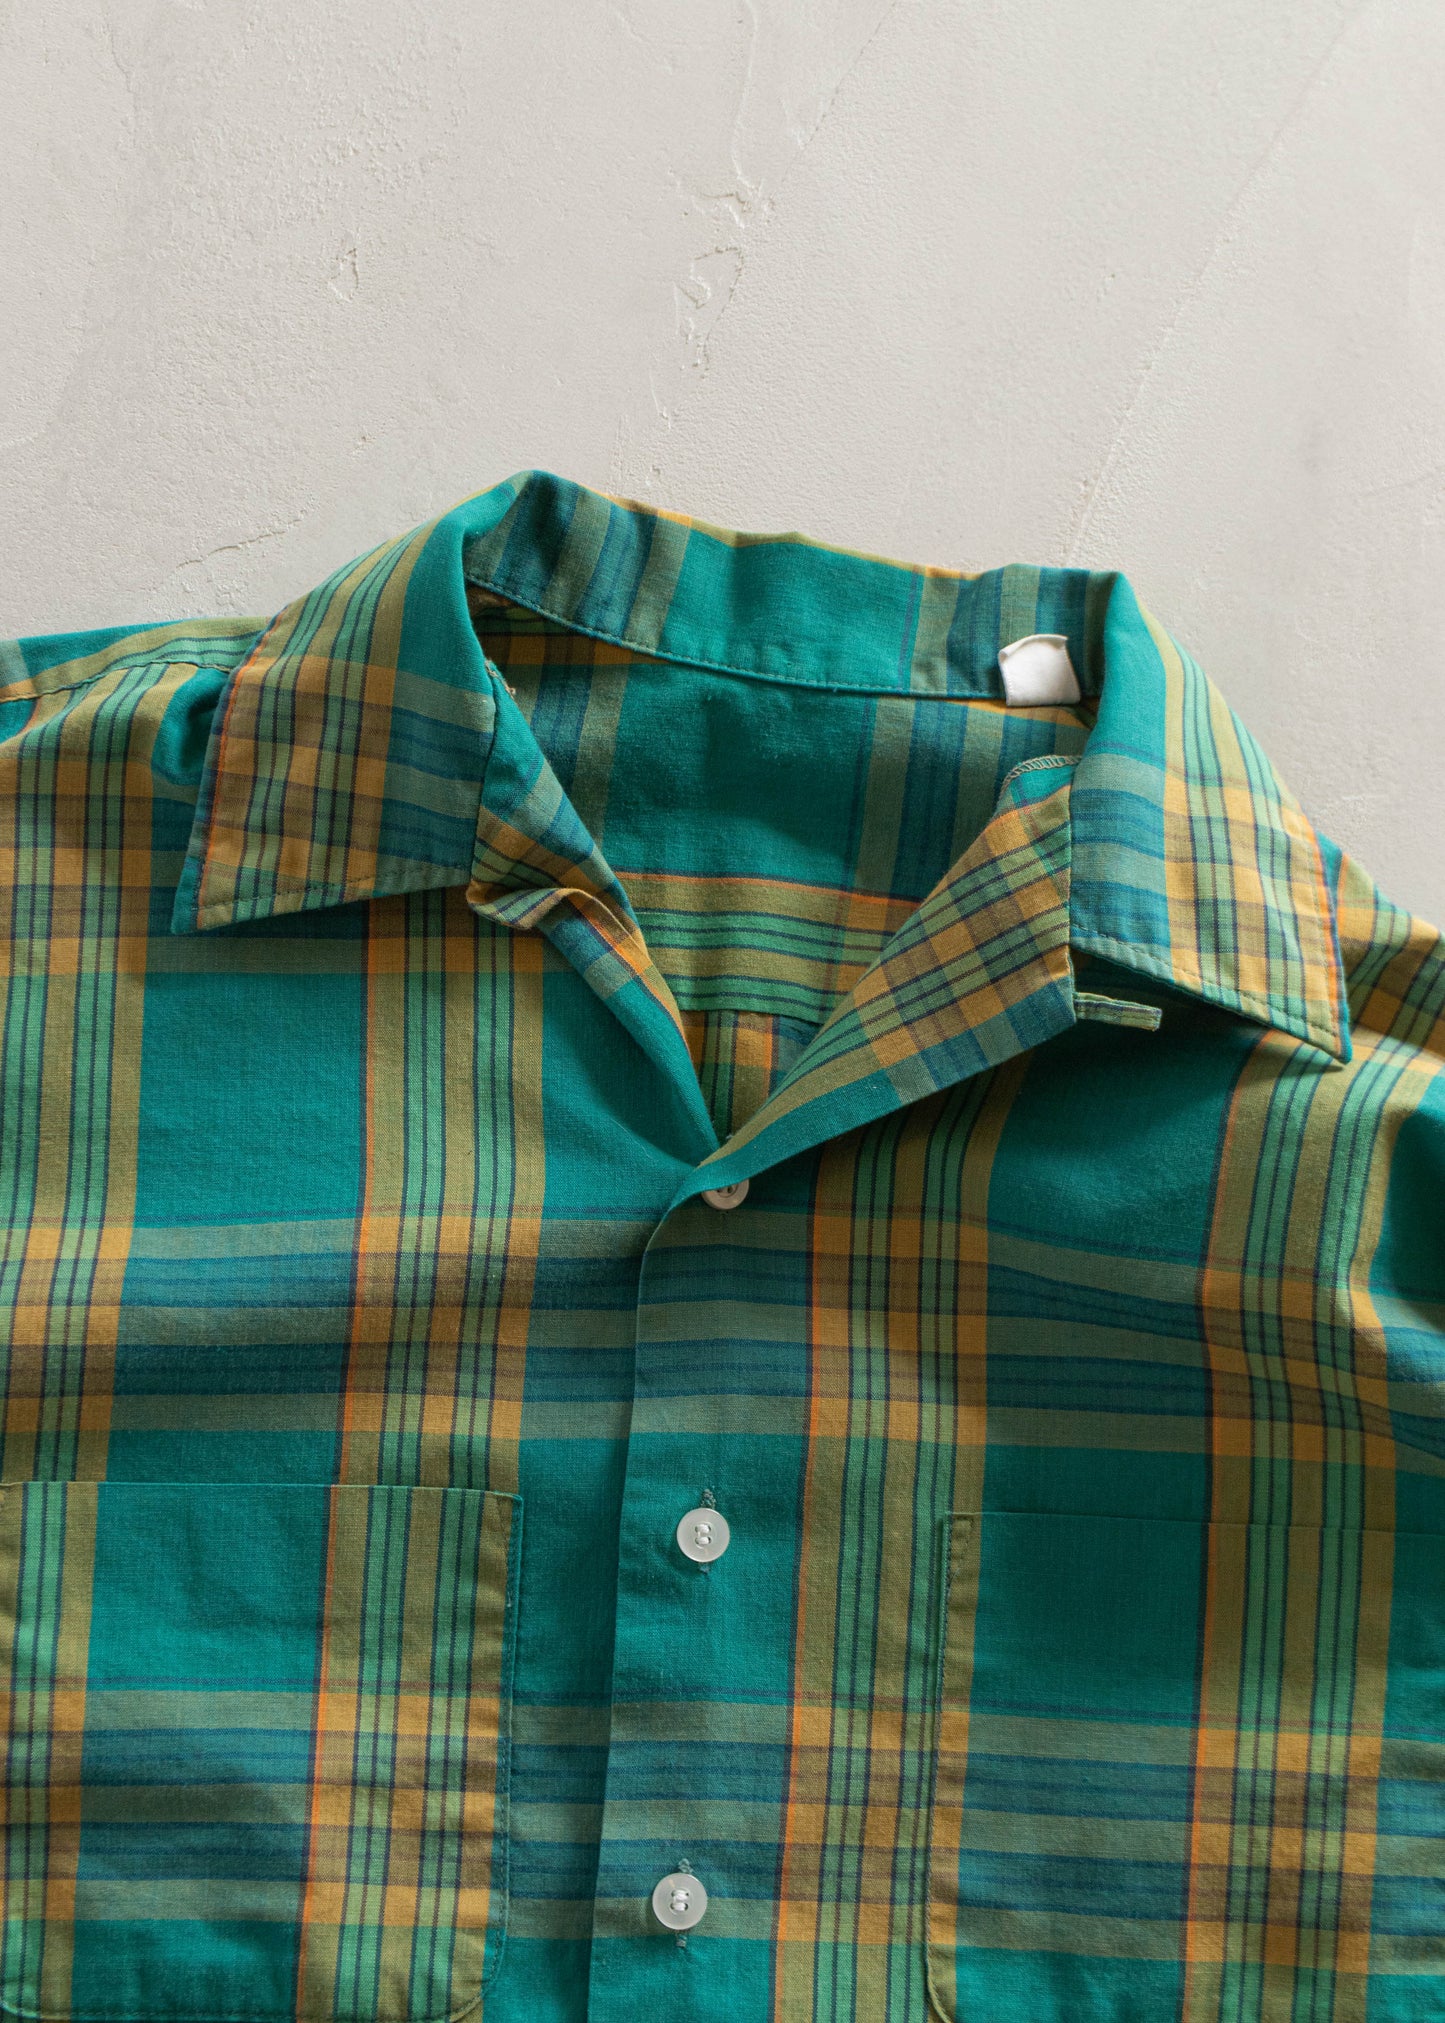 1970s Plaid Pattern Loop Collar Button Up Shirt Size S/M